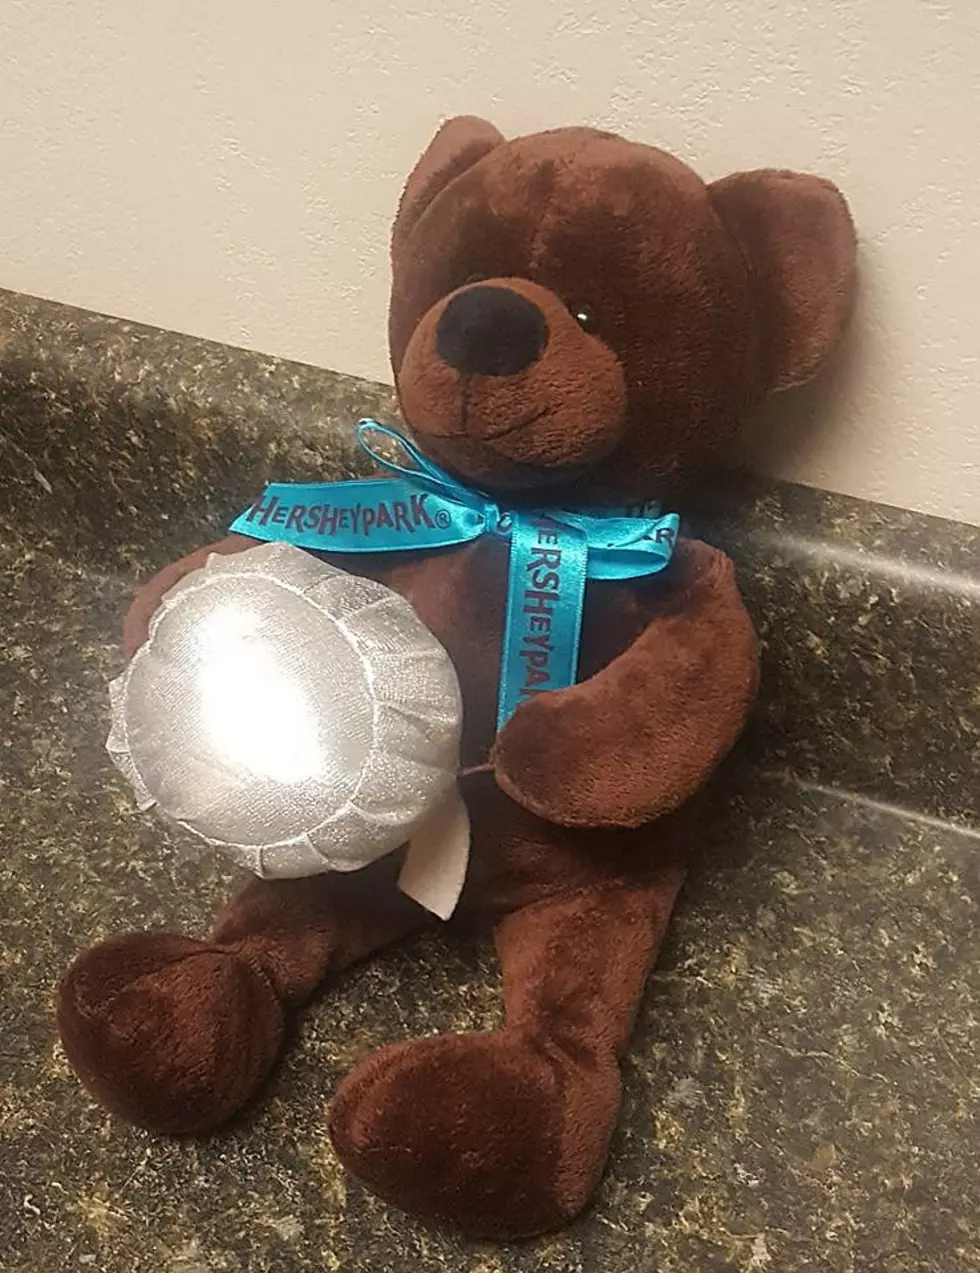 Help Us Find This Teddy Bear&#8217;s Owner